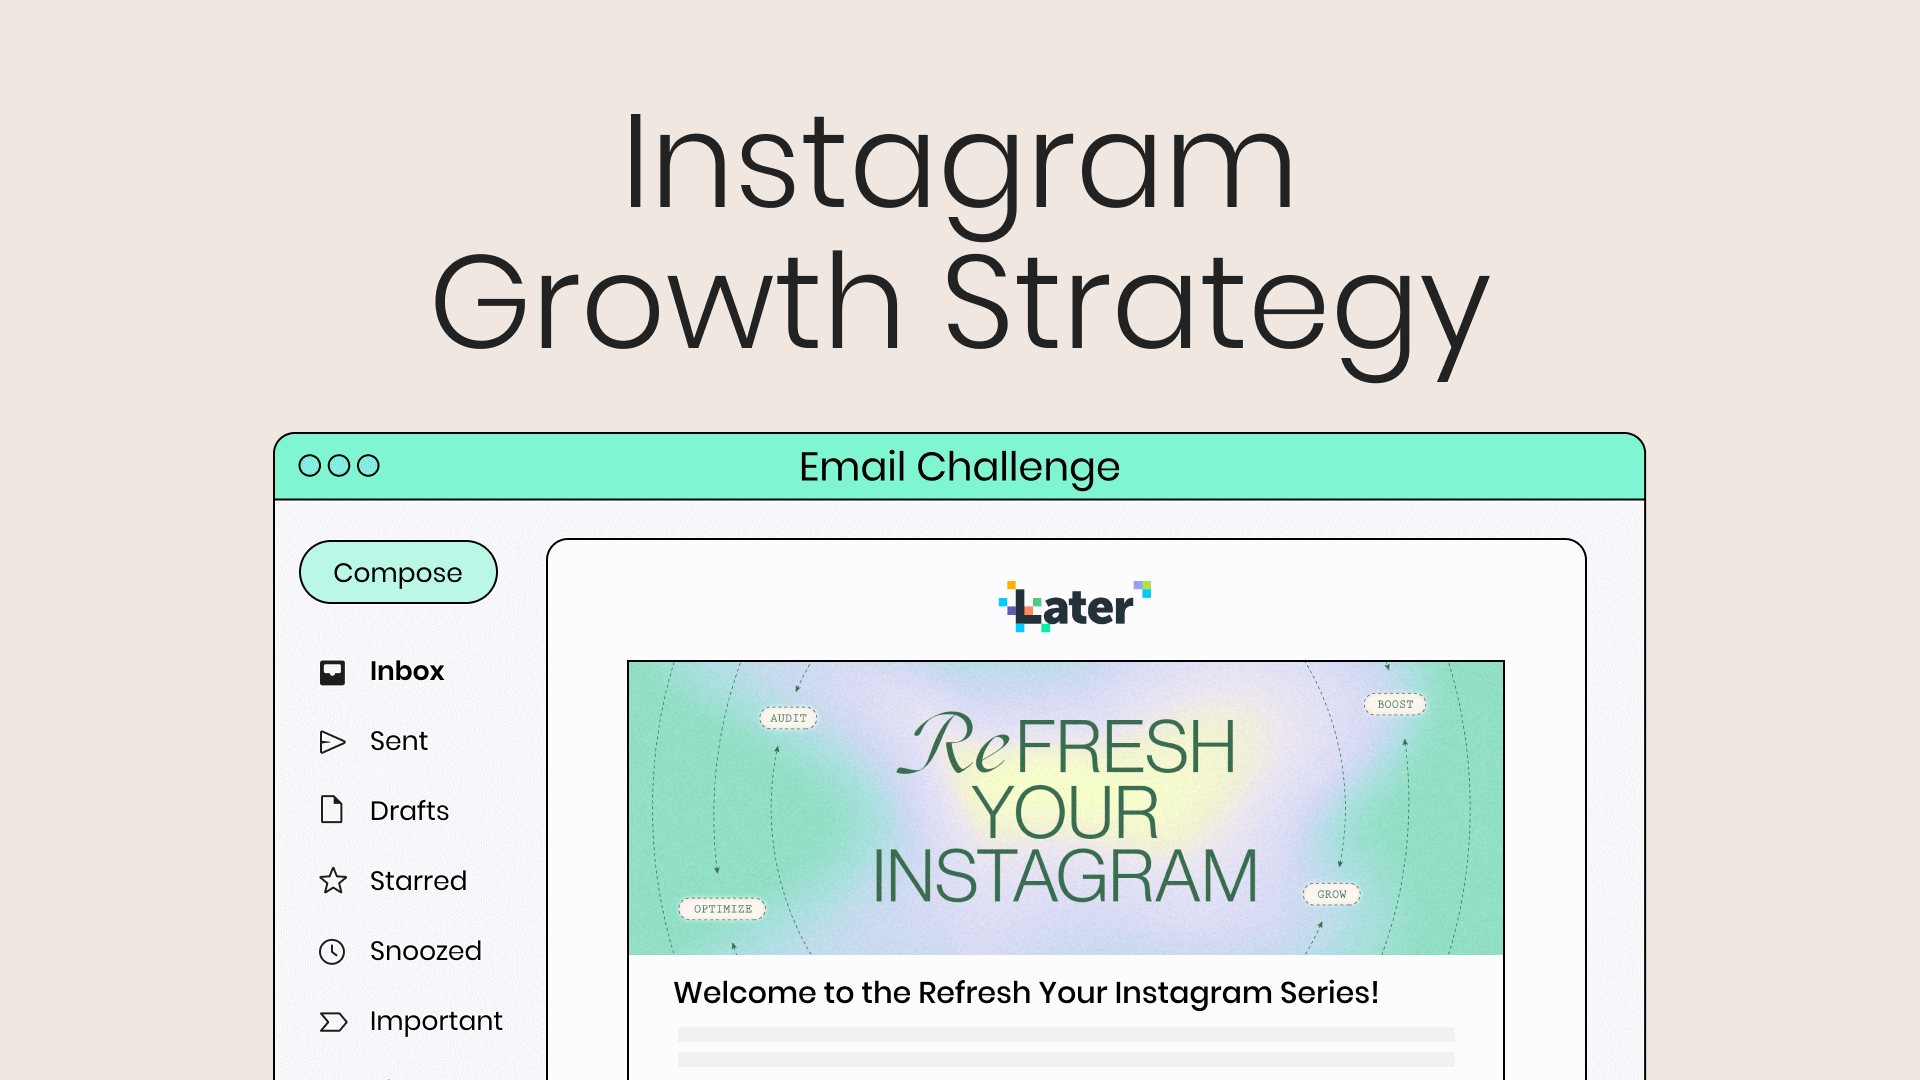 Thumbnail image with the title “instagram growth strategy” above a sample email inbox against a beige background